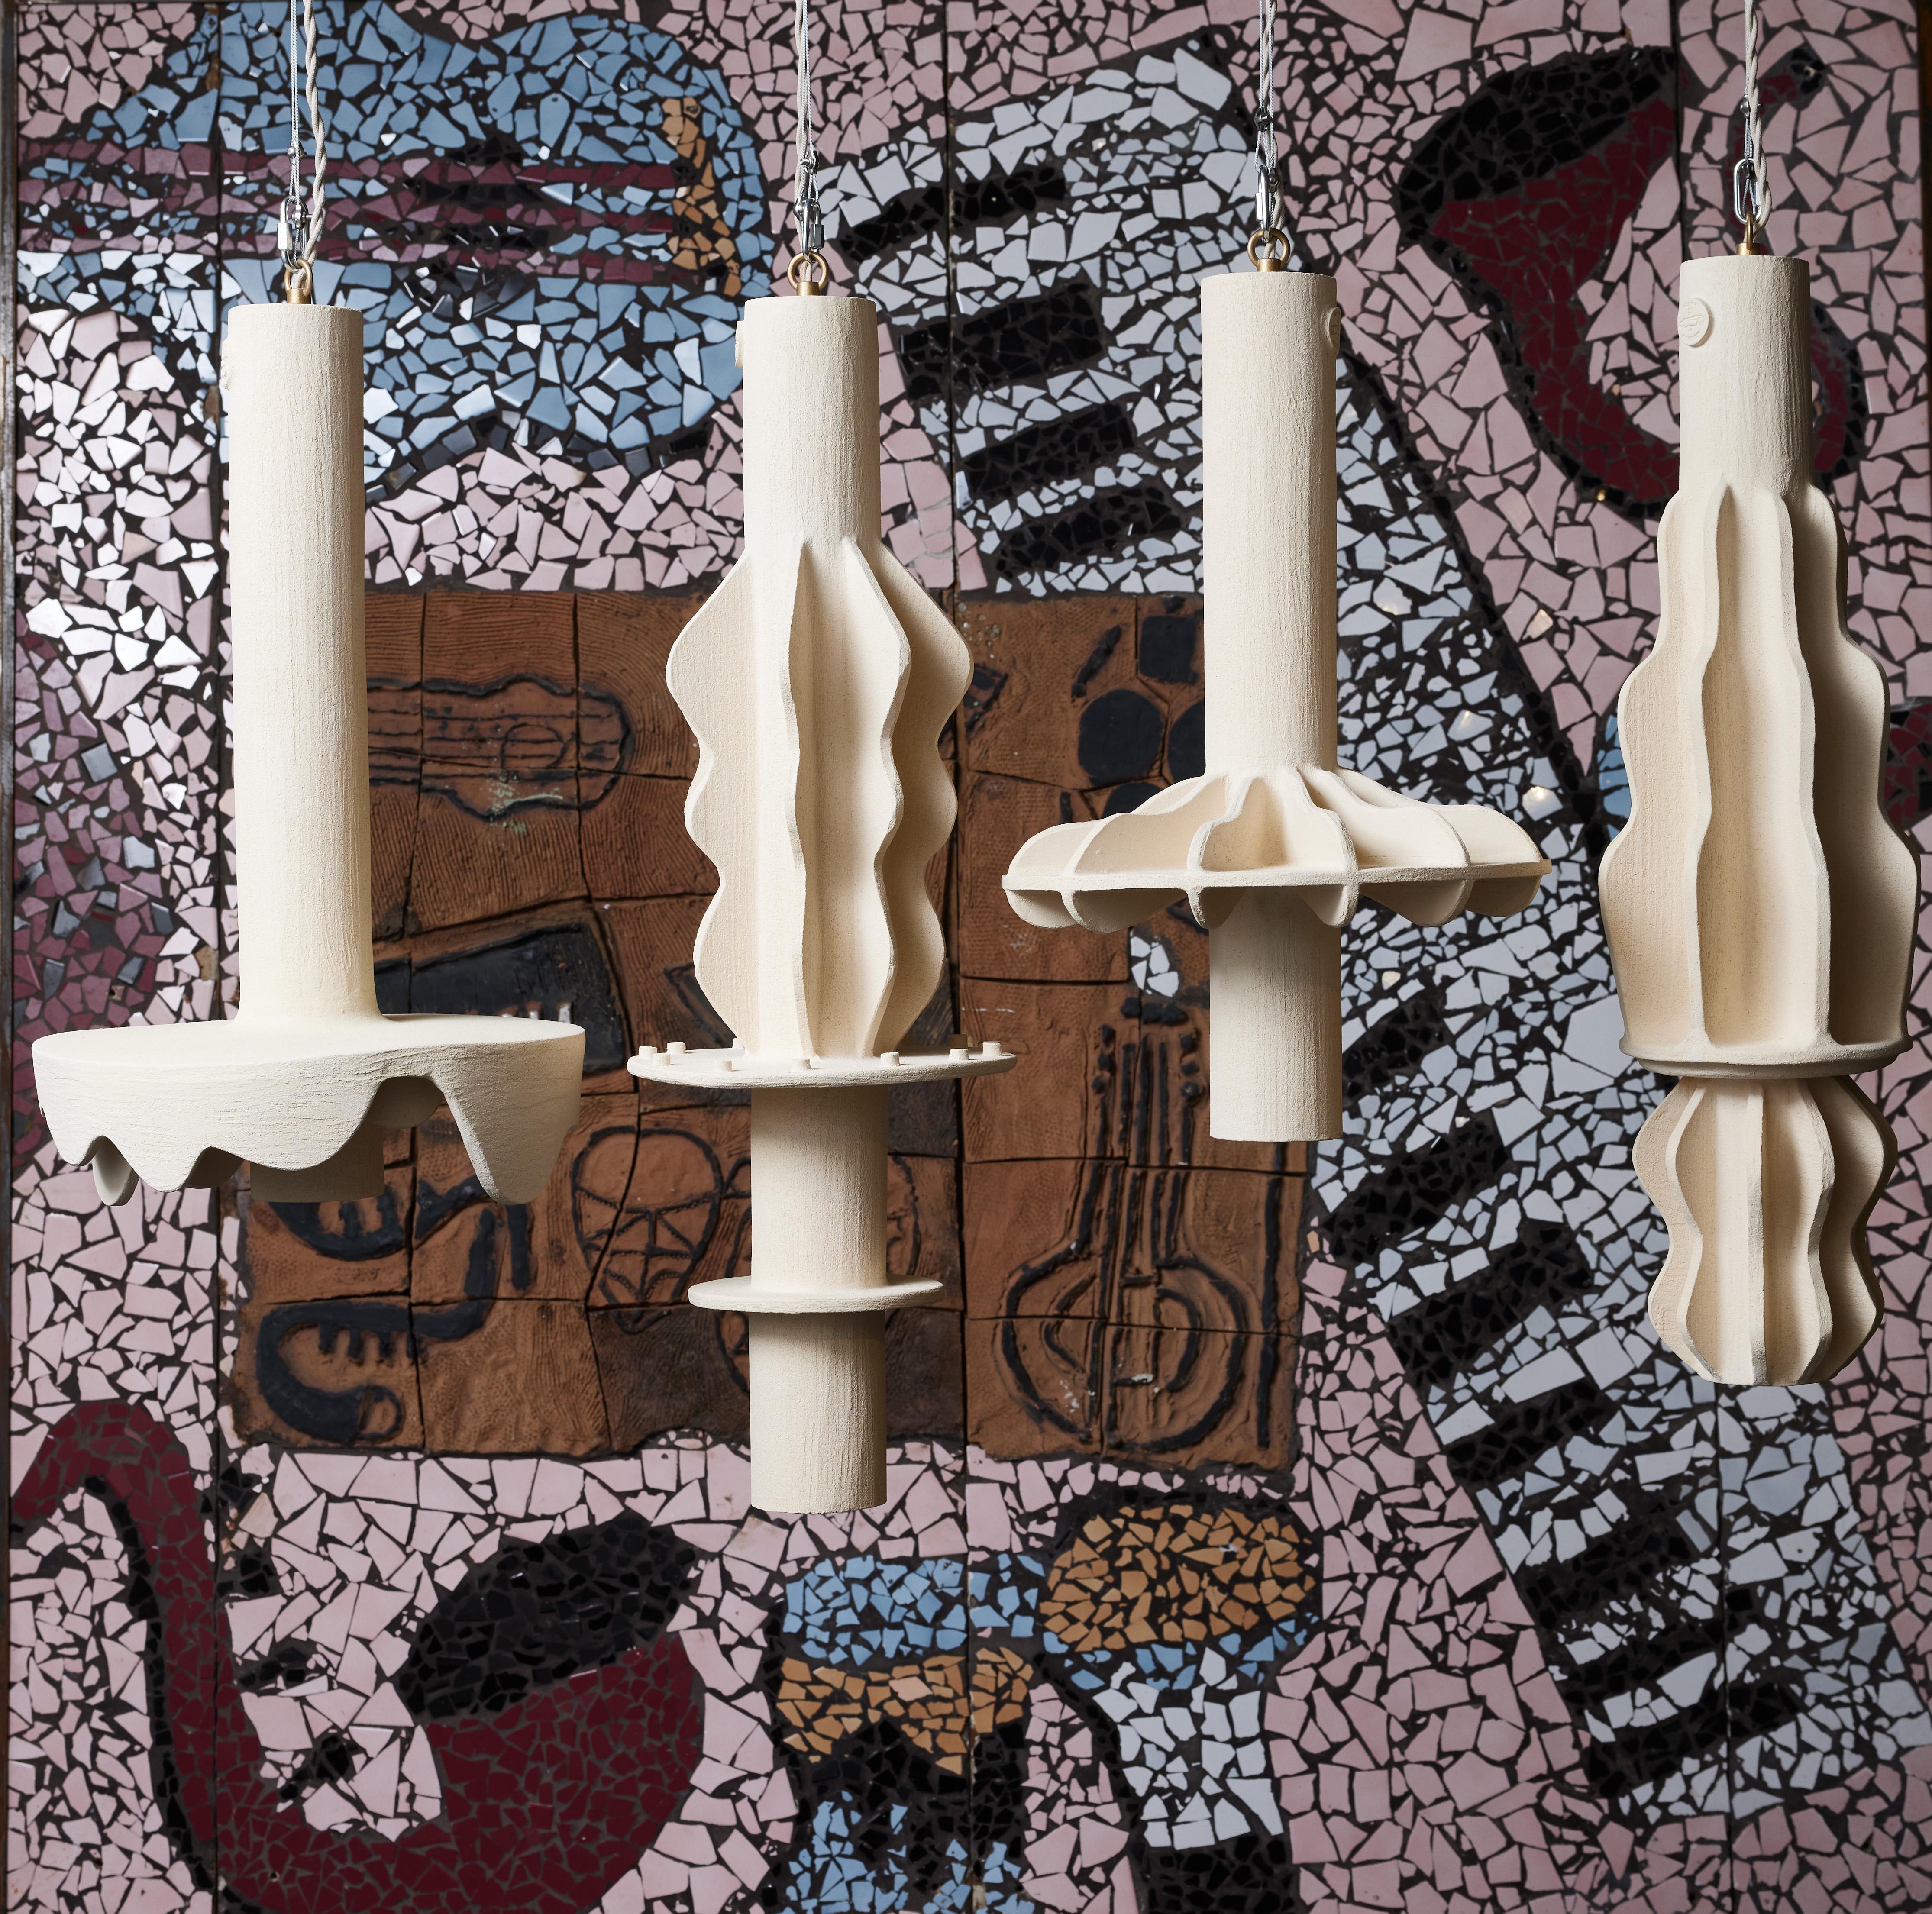 Unique suspensions designed and made by the french contemporary ceramist Olivia Cognet.

Each suspension has a similar cylindrical shape, then decorated with several shapes and motifs.

One source of light per fixture.

Since moving to Los Angeles